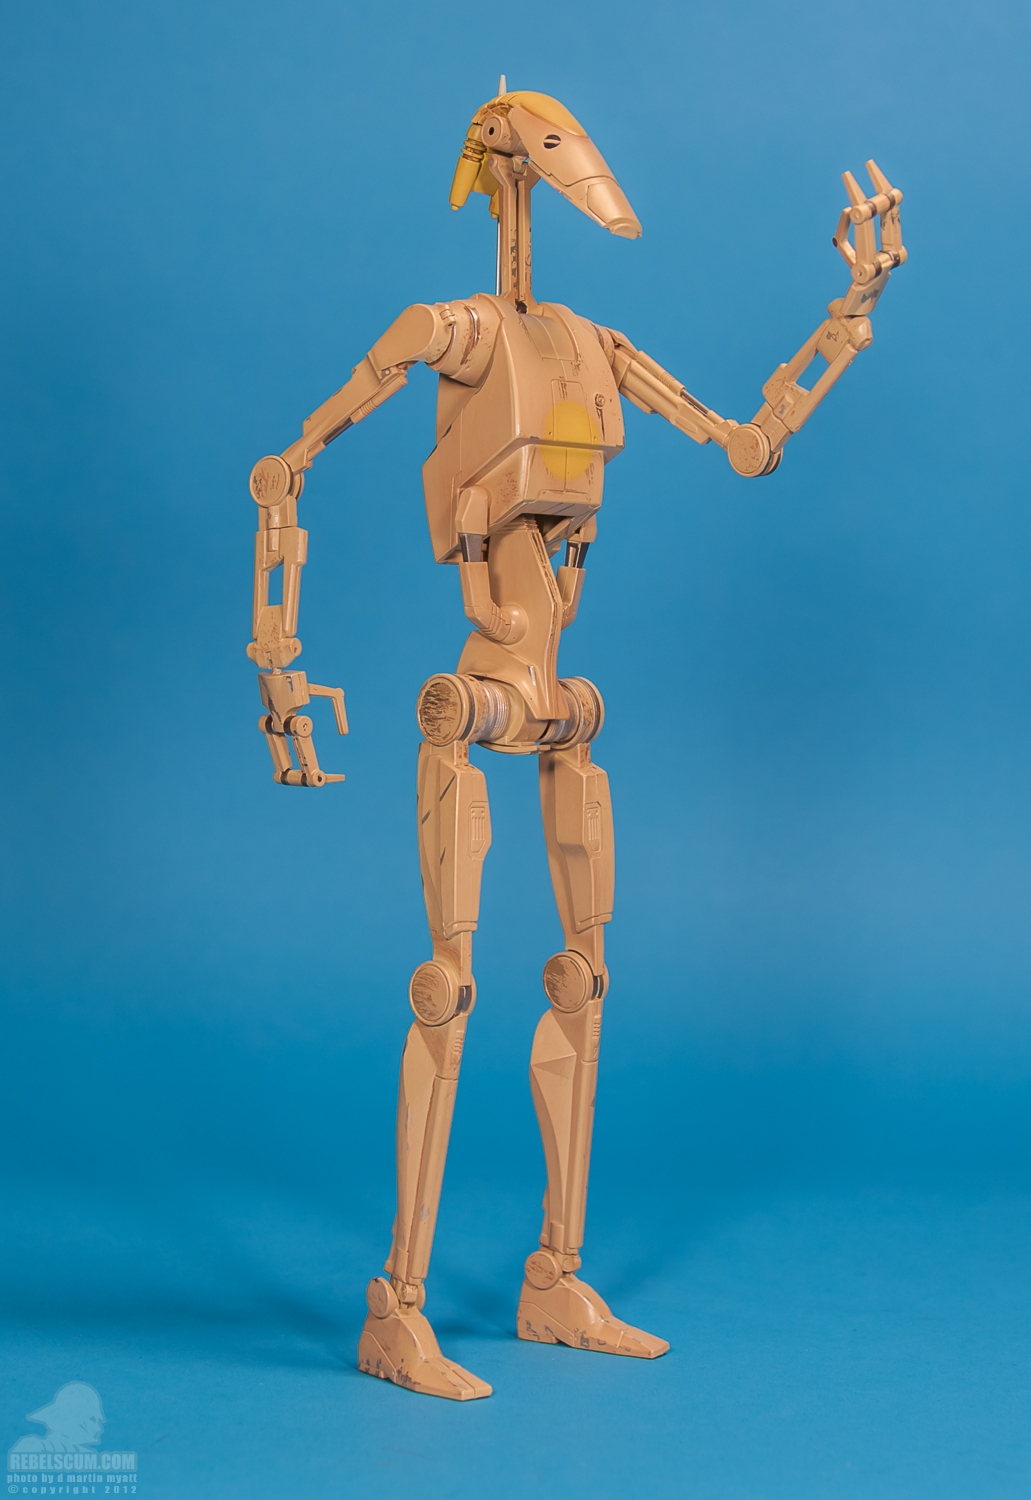 OOM-9_Battle_Droid_Commander_Sideshow_Collectibles-02.jpg